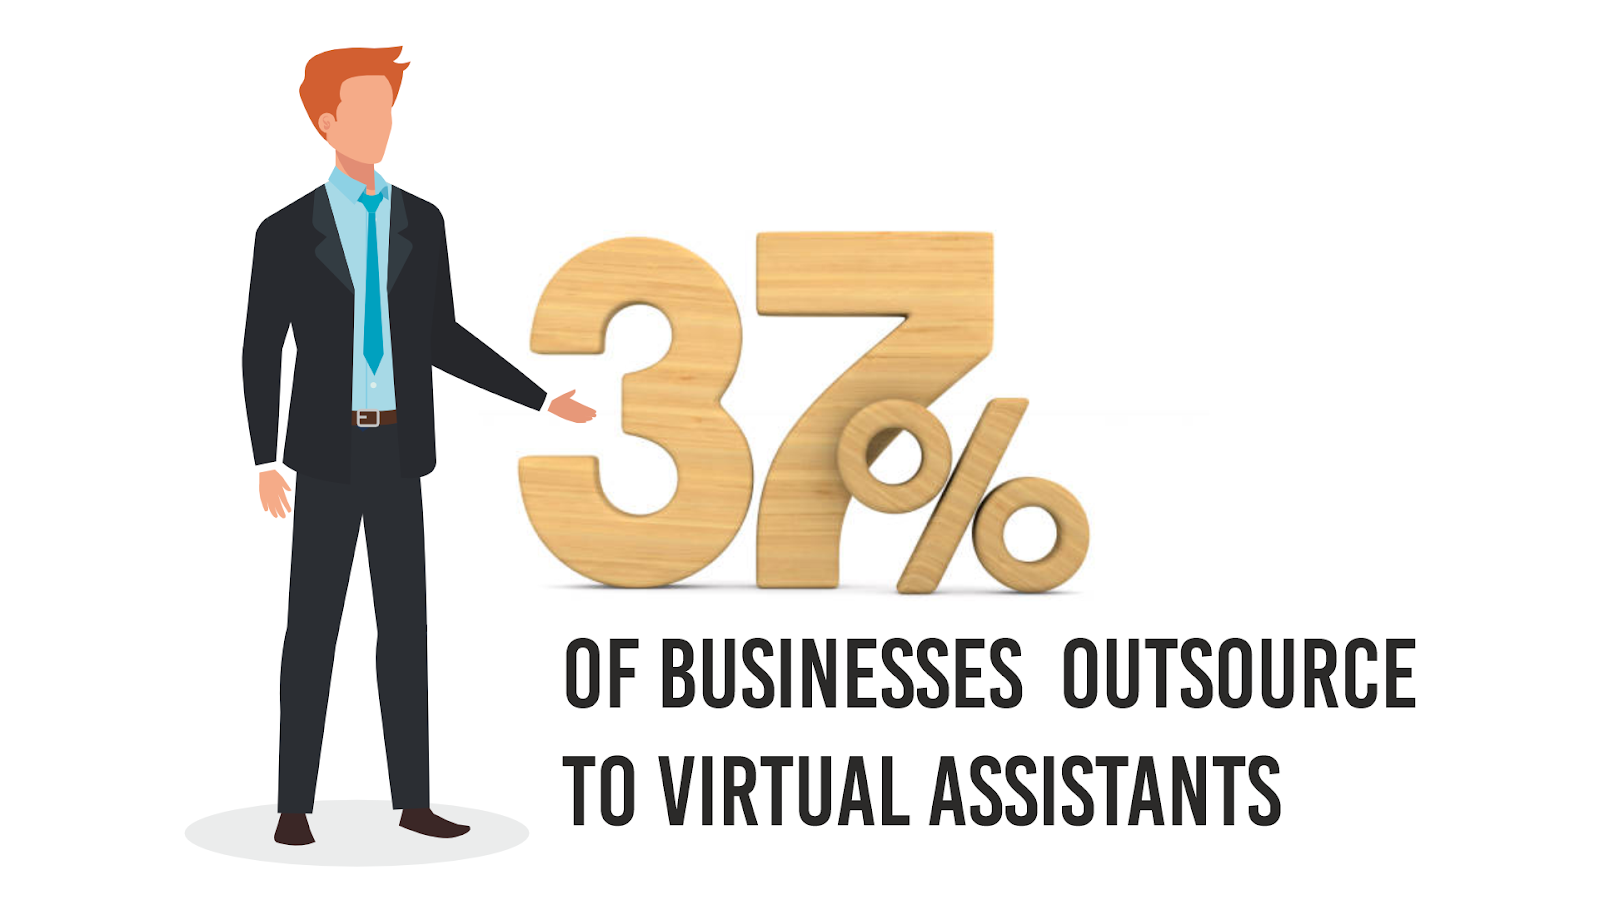 More and more companies are relying on remote virtual assistance